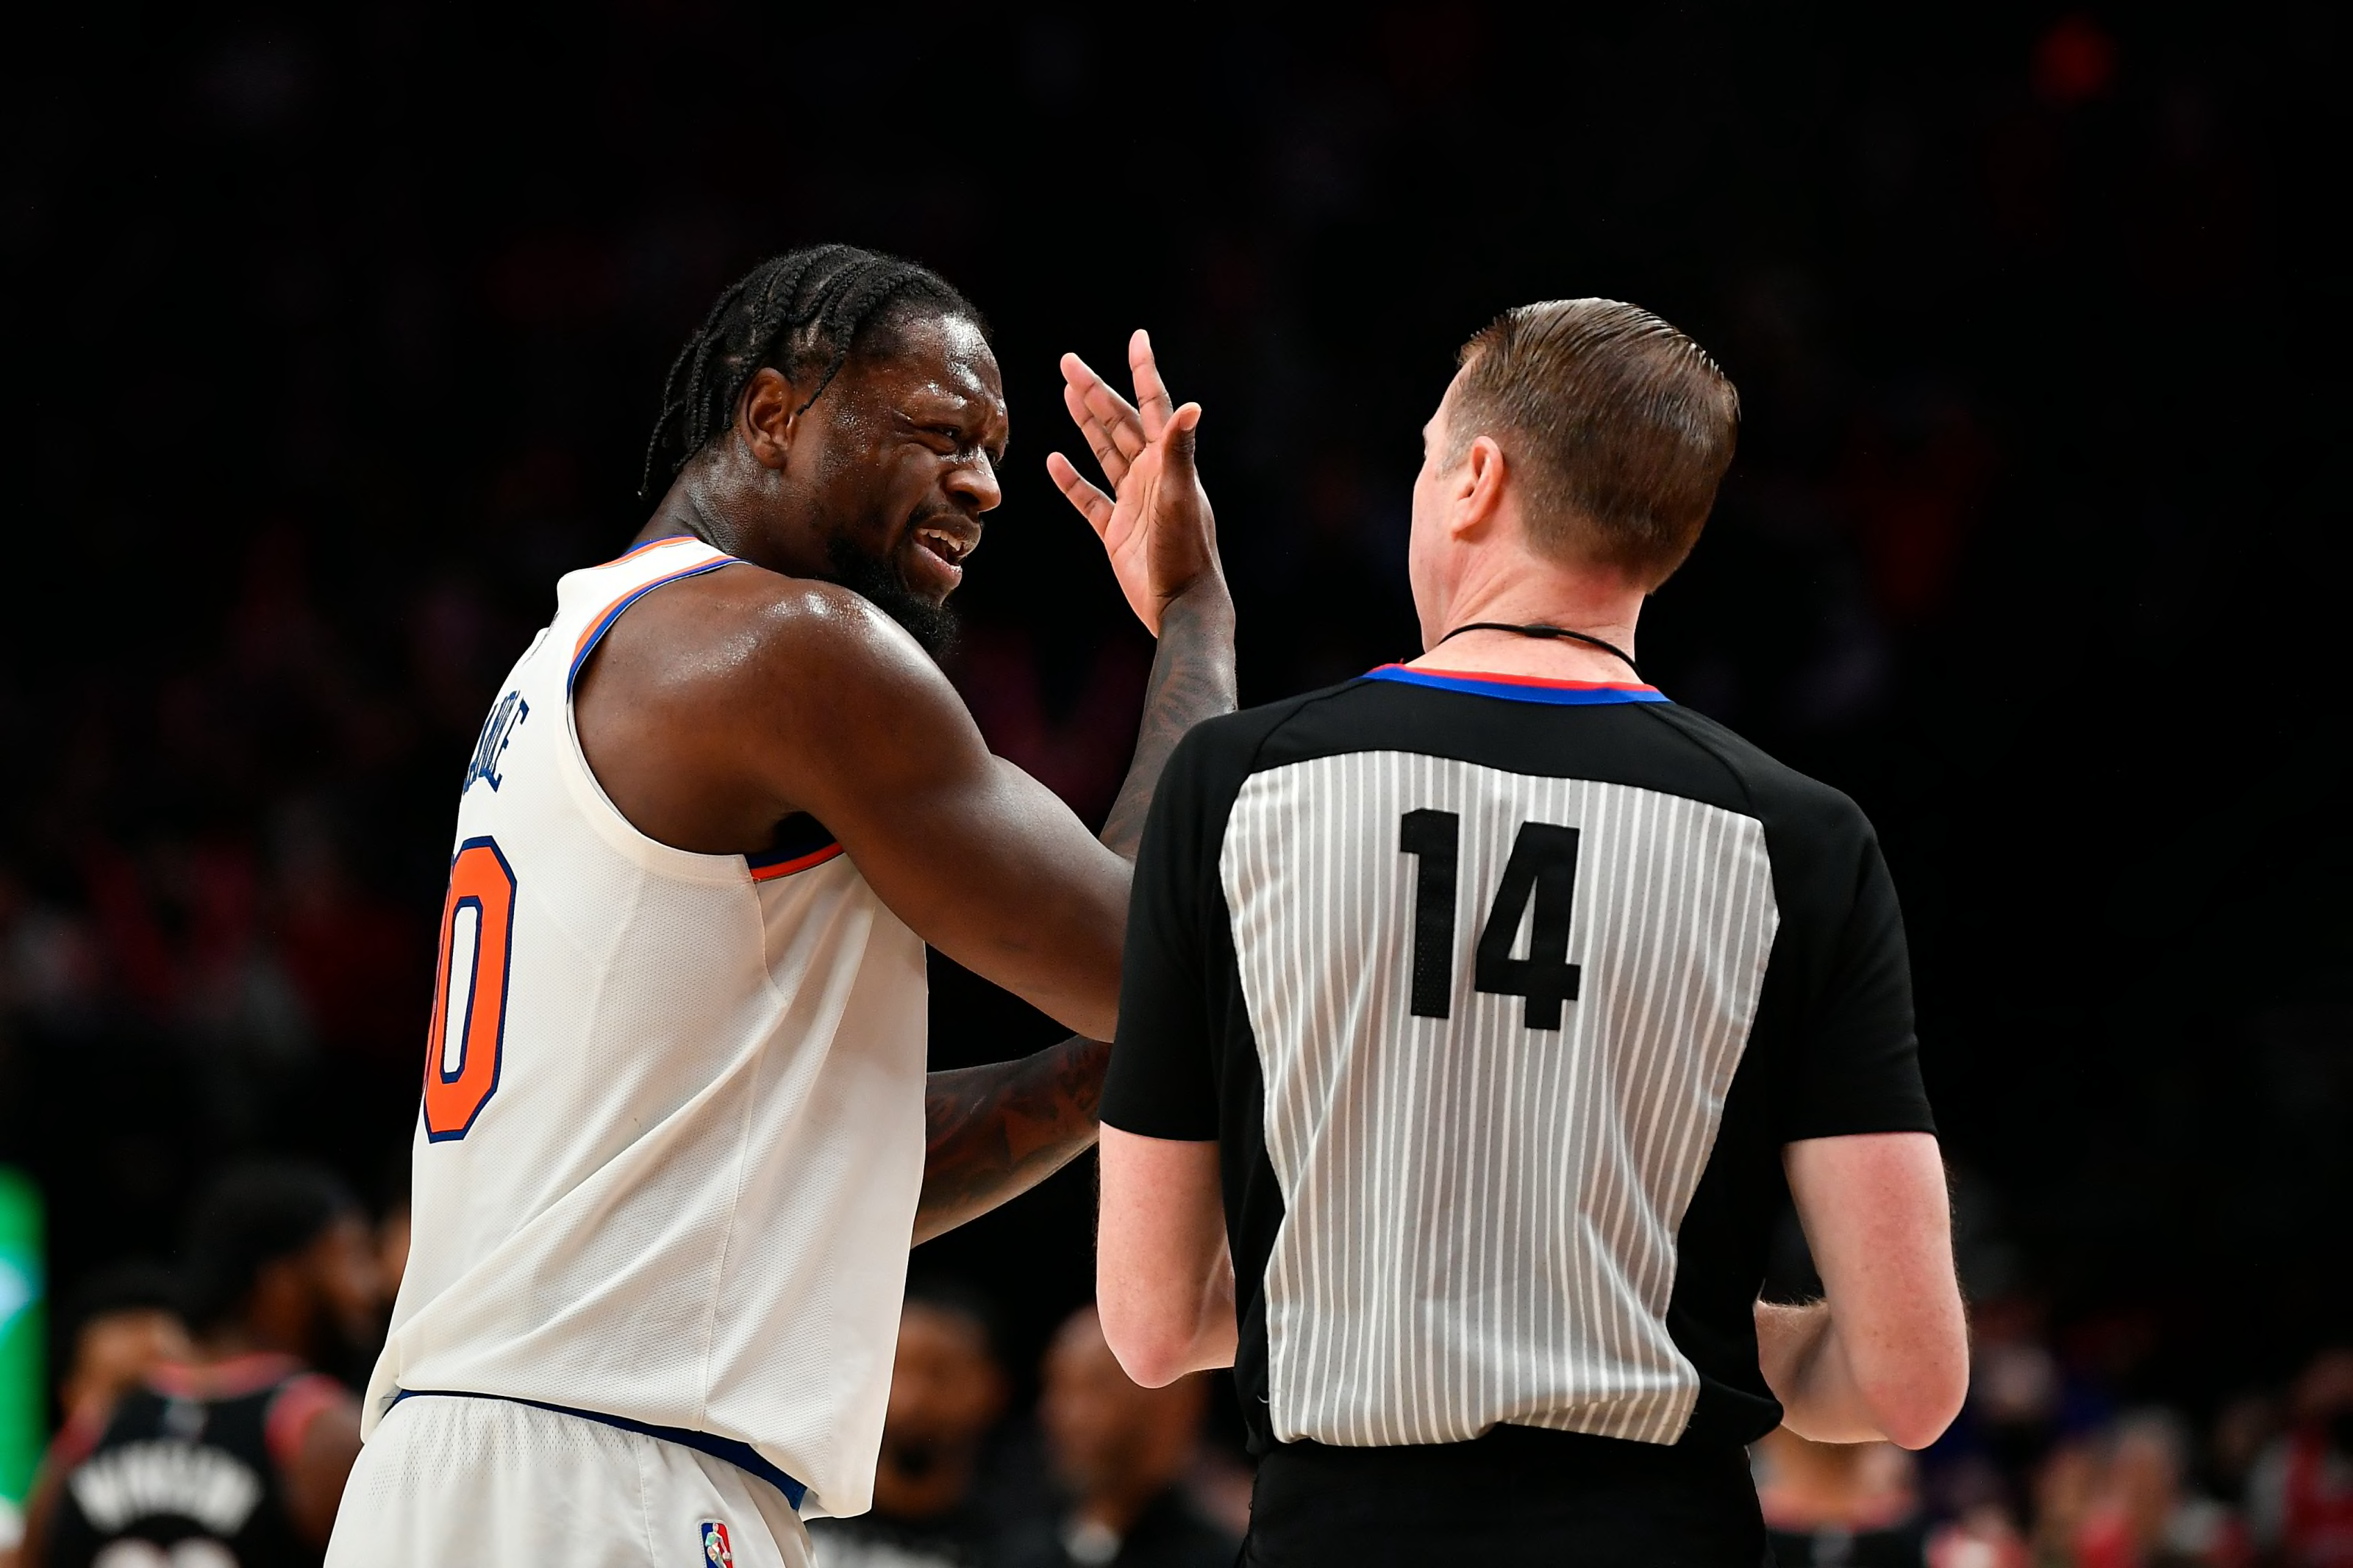 Why the Knicks' poor play is both unsurprising and hilarious